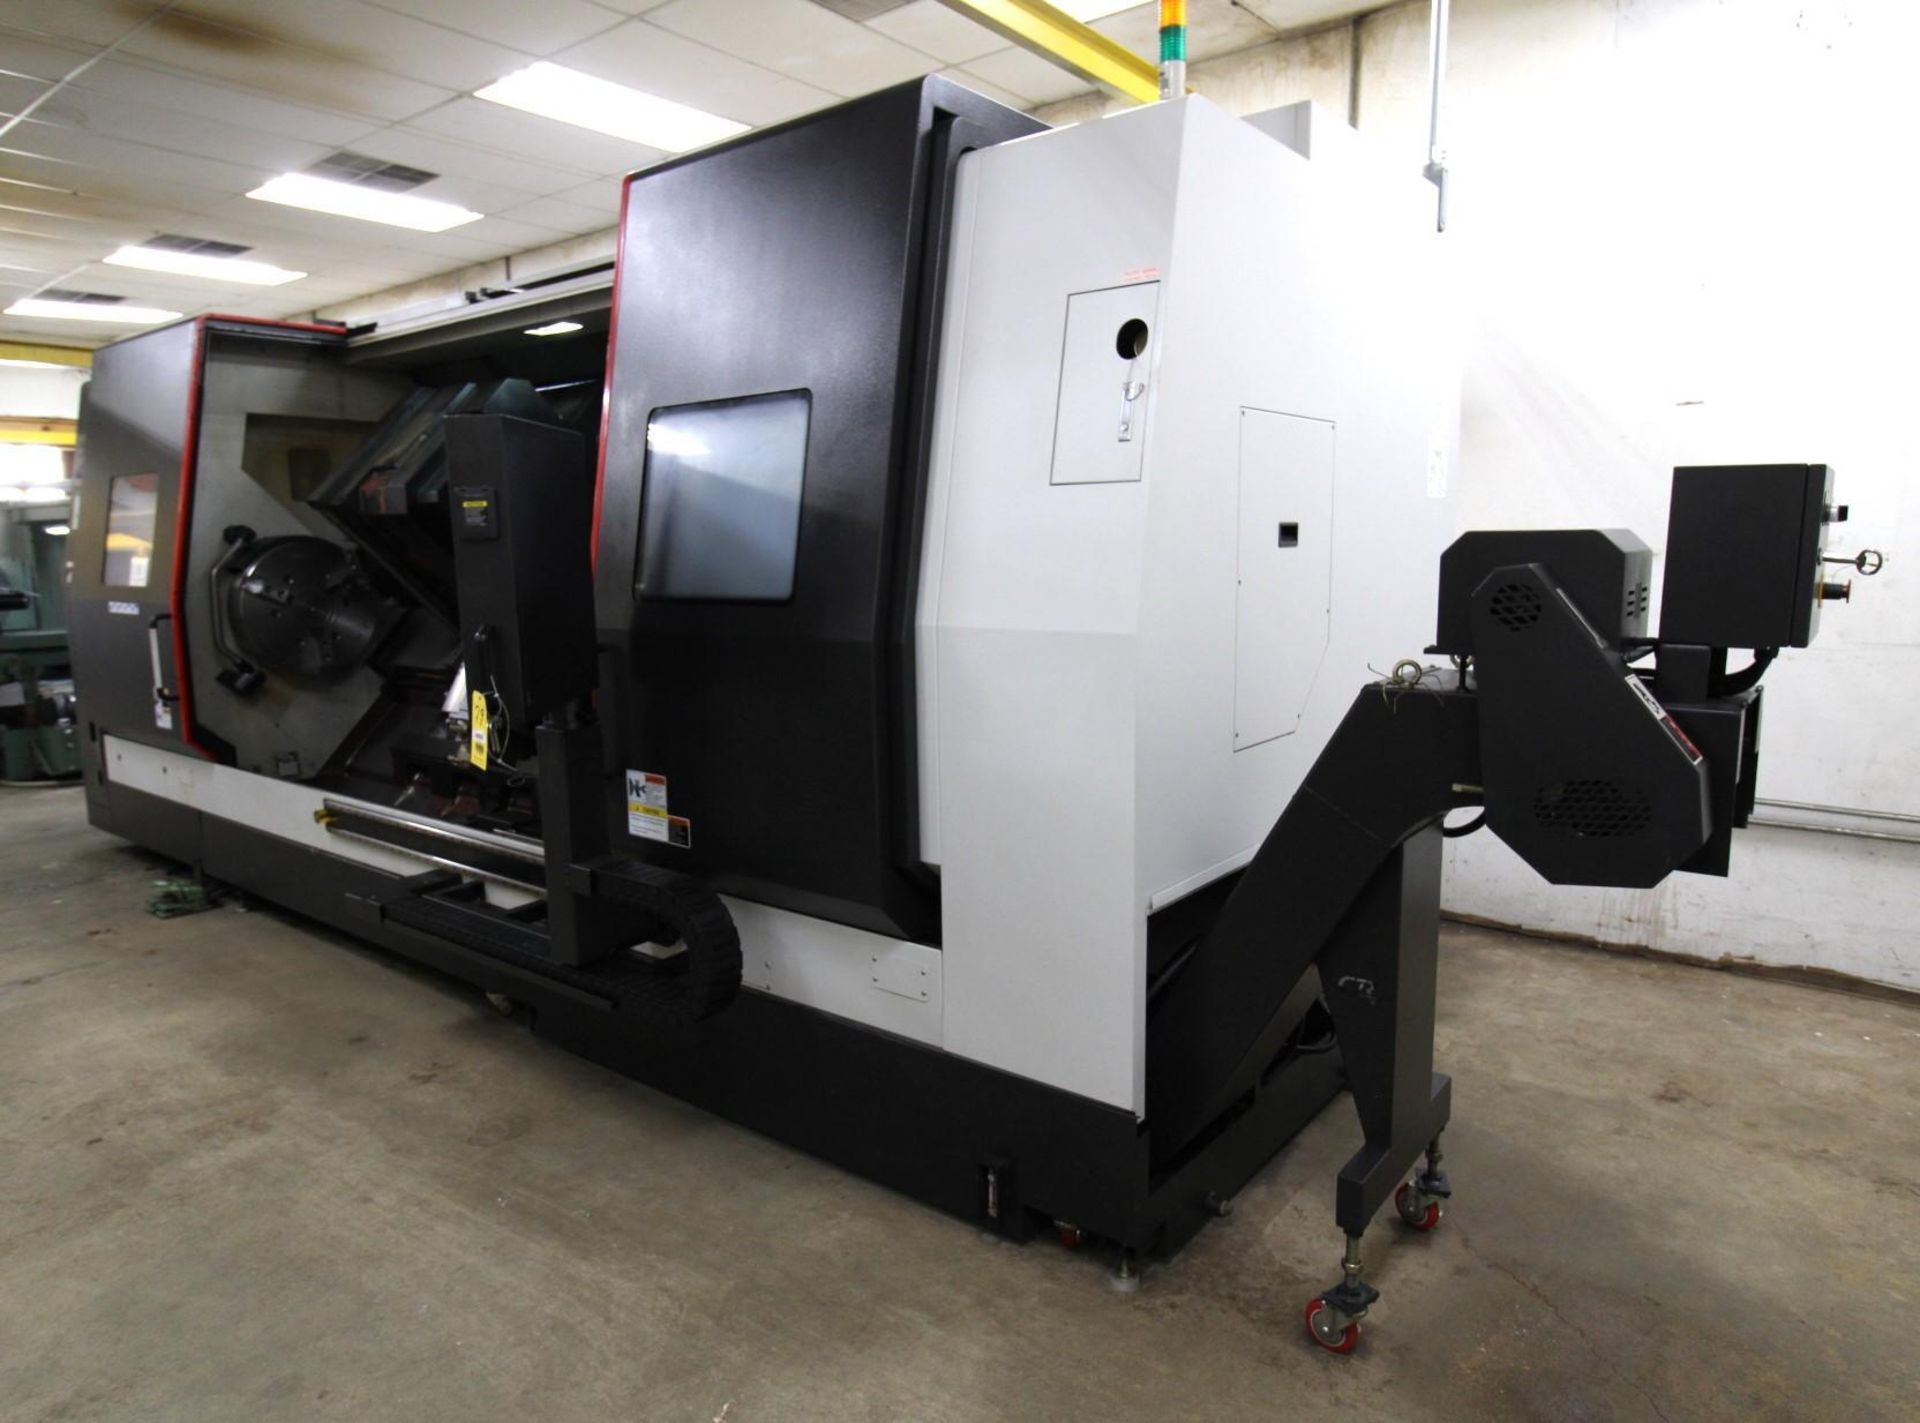 MULTI AXIS CNC MILLING & TURNING CENTER, SAMSUNG MDL. SL-45XLY, new 2014, Live tooling & Y-axis, 6. - Image 3 of 15